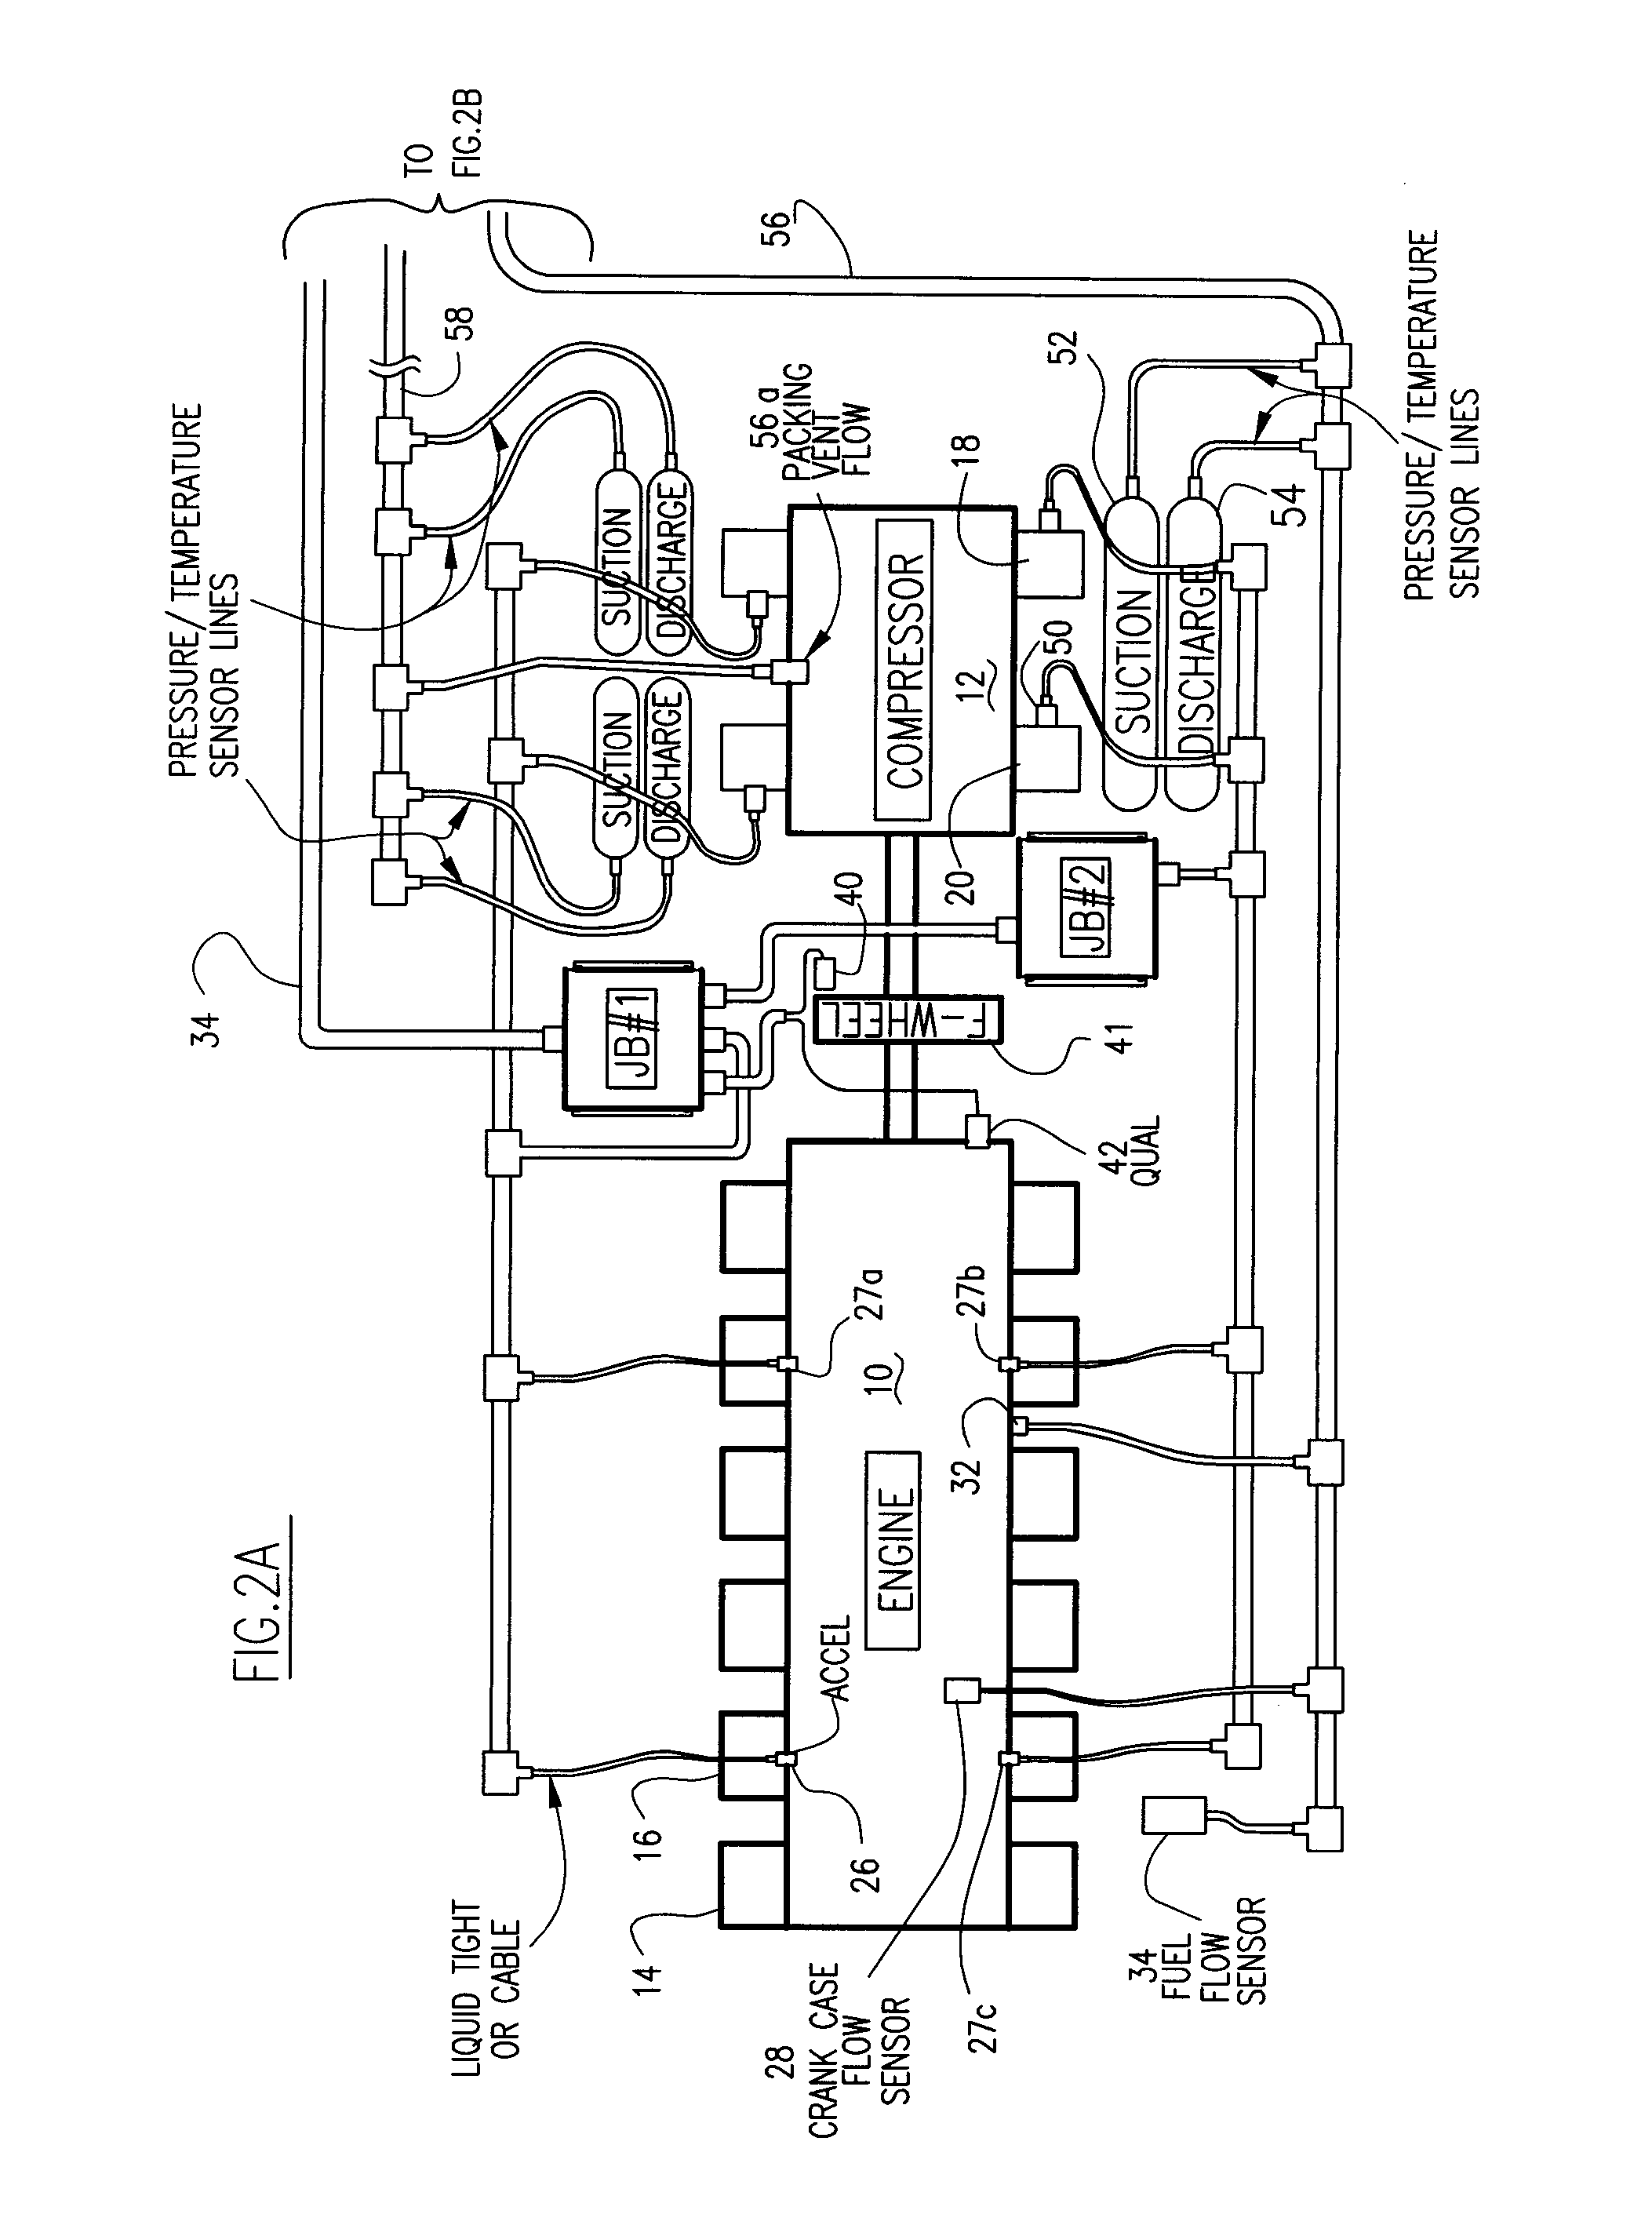 Automated fault diagnosis method and system for engine-compressor sets